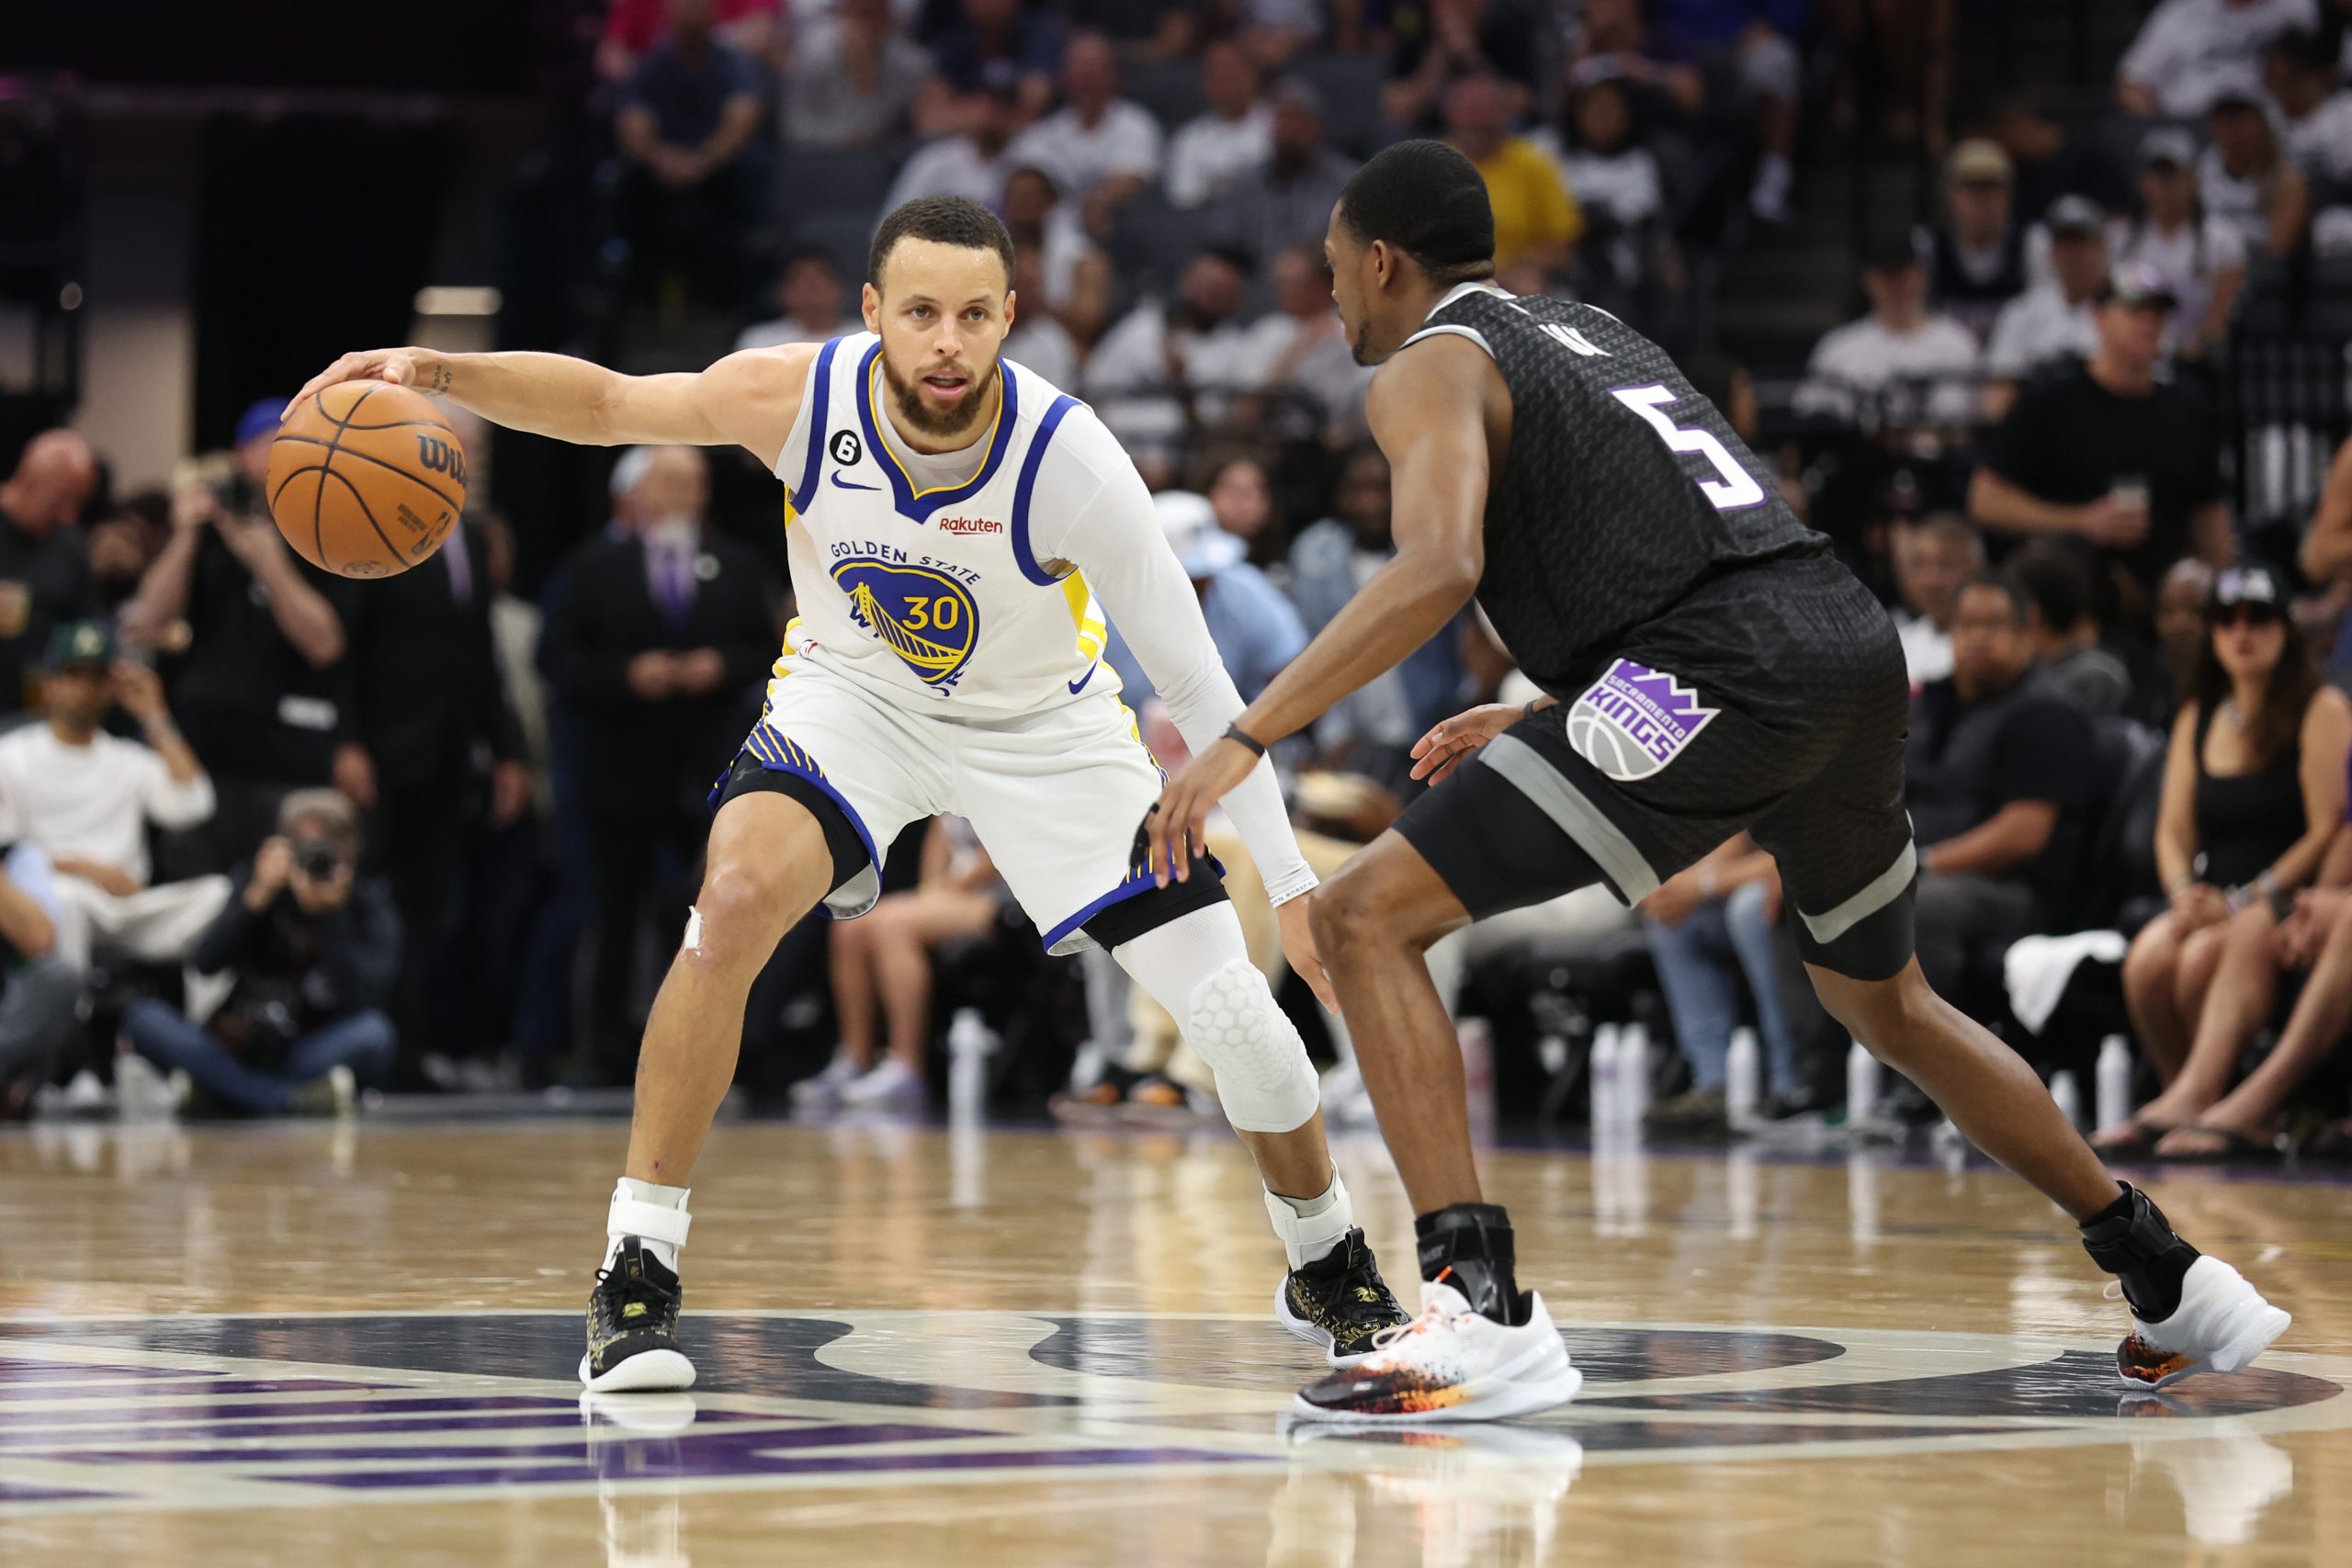 Kings head coach discusses Steph Curry's game winning performance